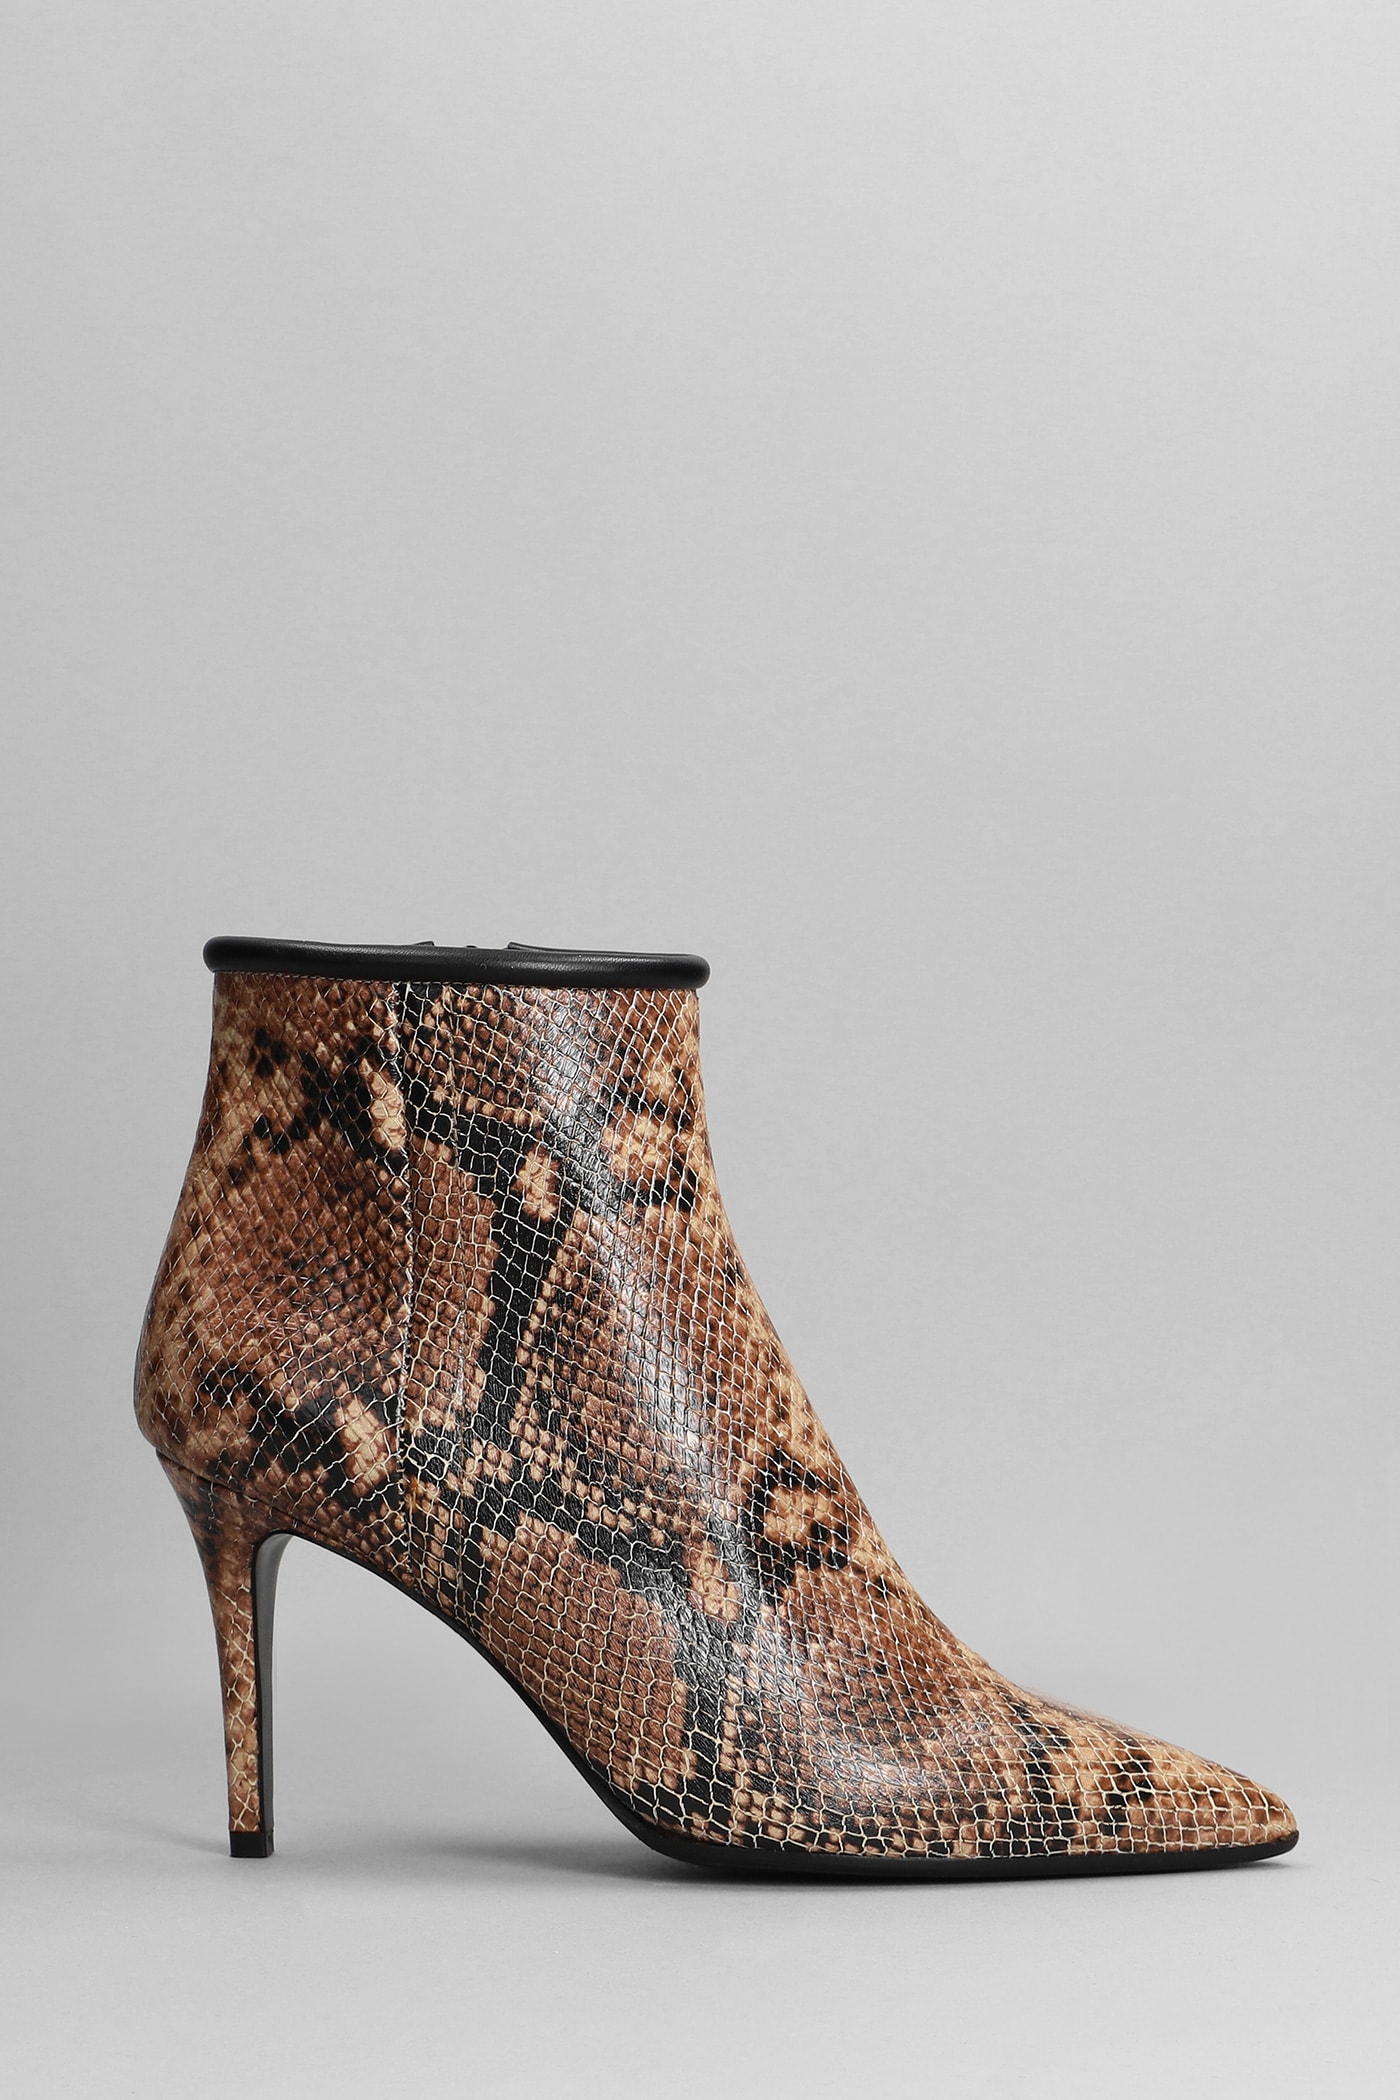 Fabio Rusconi high heels ankle boots in python print leather